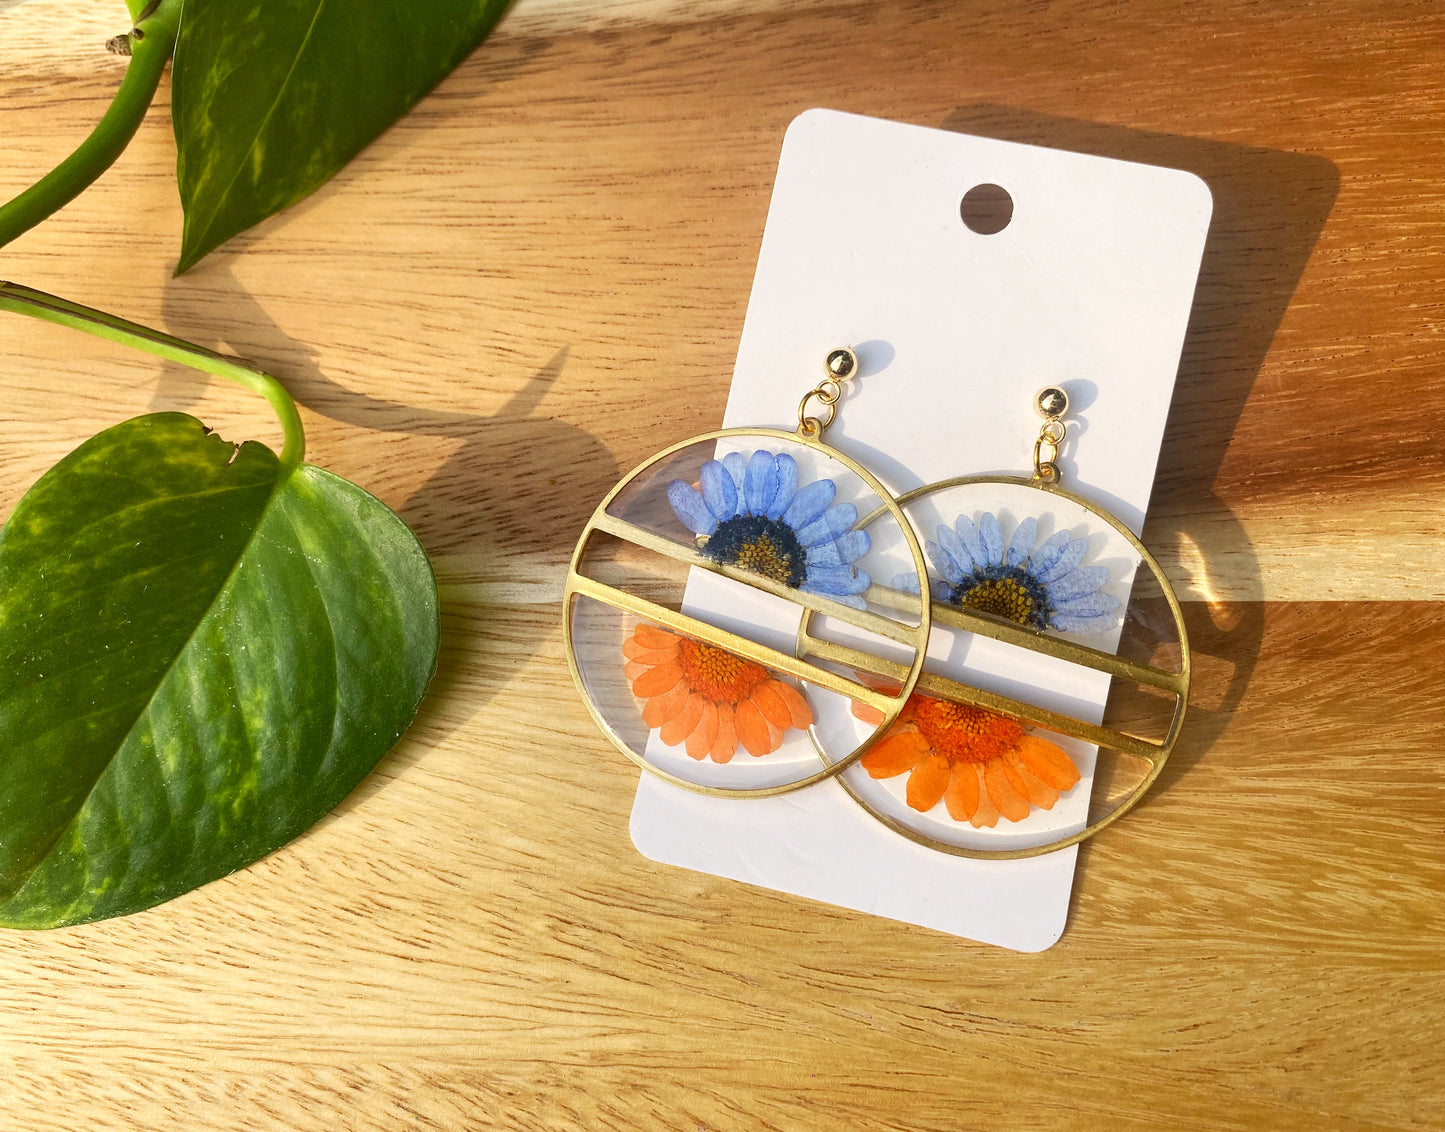 UF Gator Earrings. University of Florida. Orange and Blue. Made with real pressed flowers.  Hypoallergenic Earrings. 24K gold.